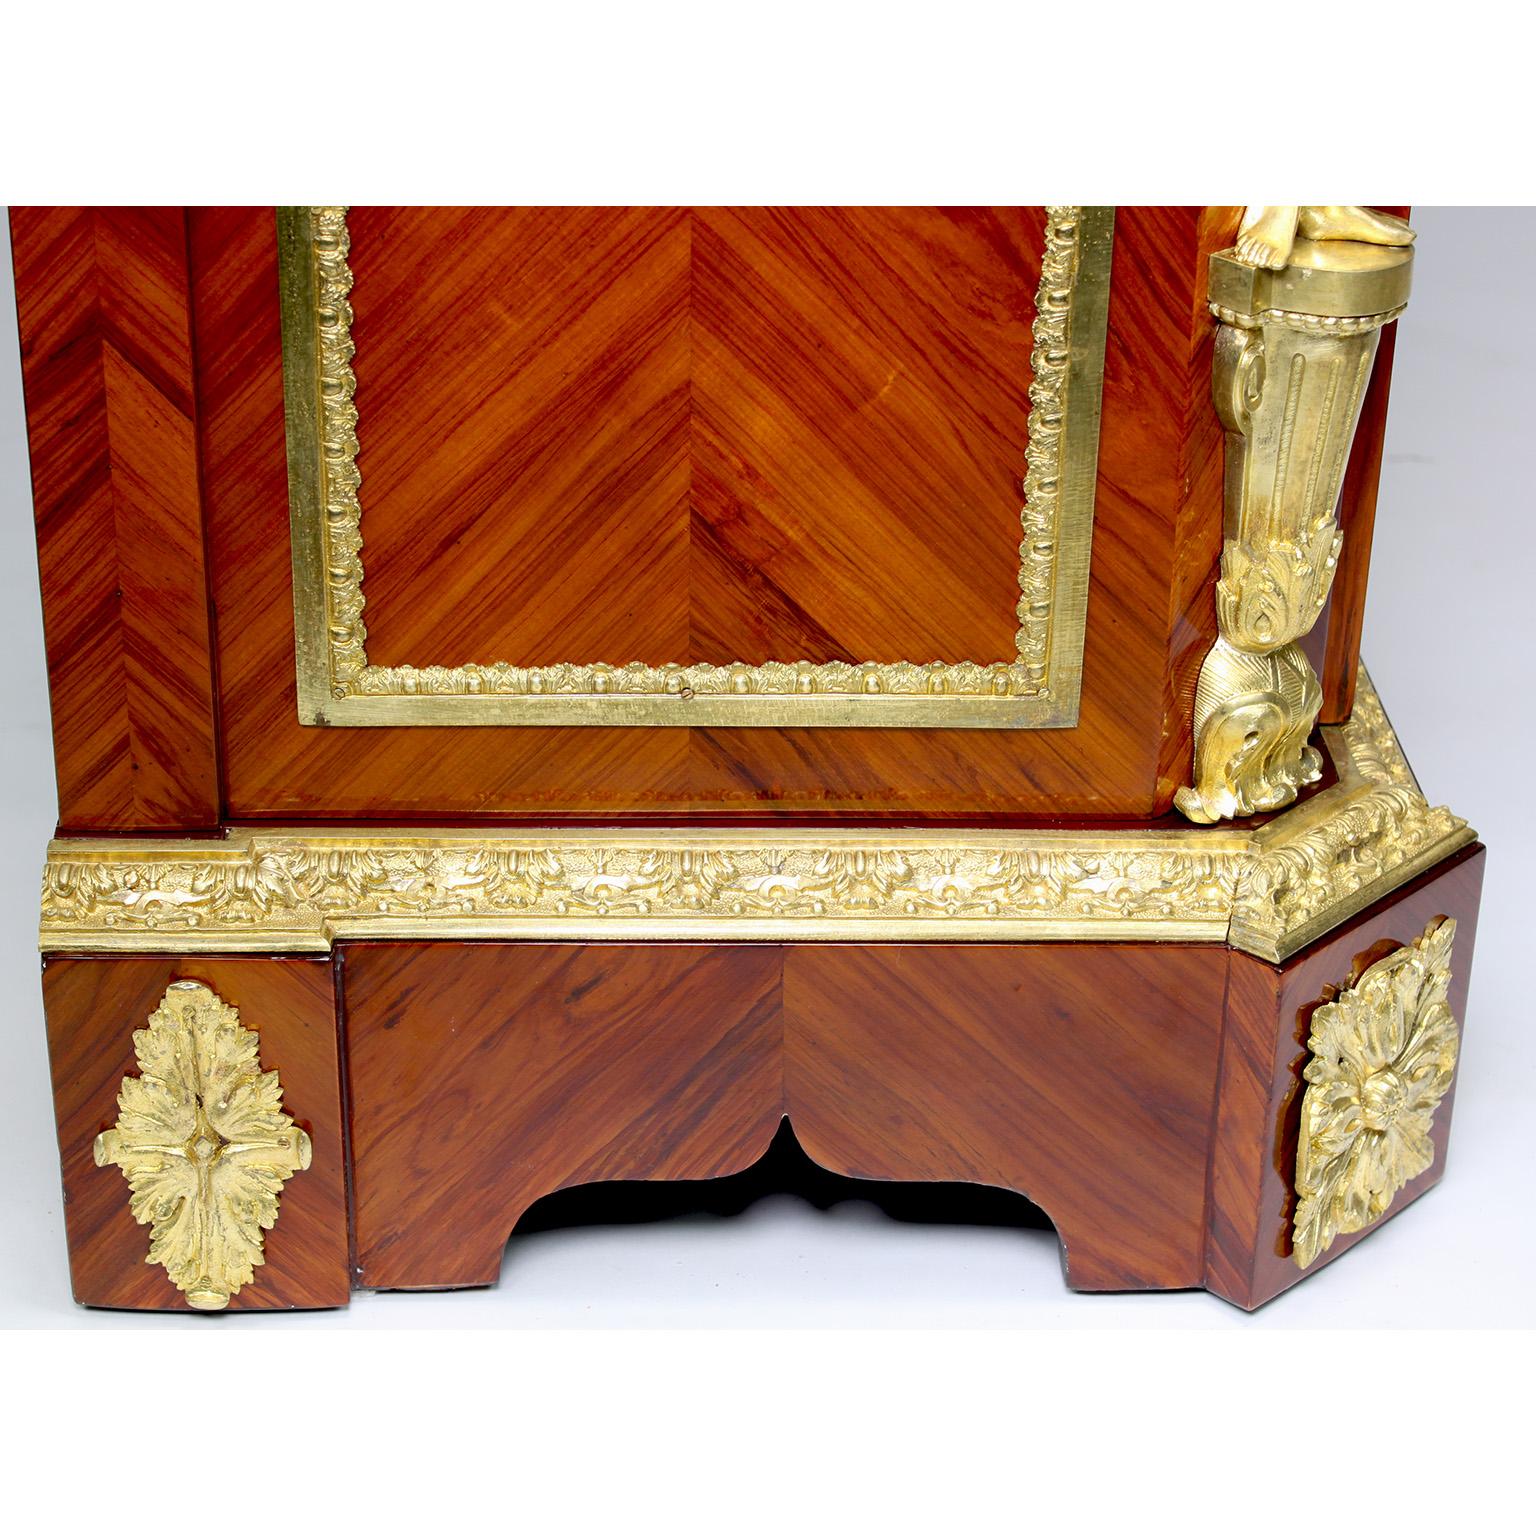 French Napoleon III Ormolu & Porcelain Mounted Cabinet Meuble D'Appui by Befort For Sale 11